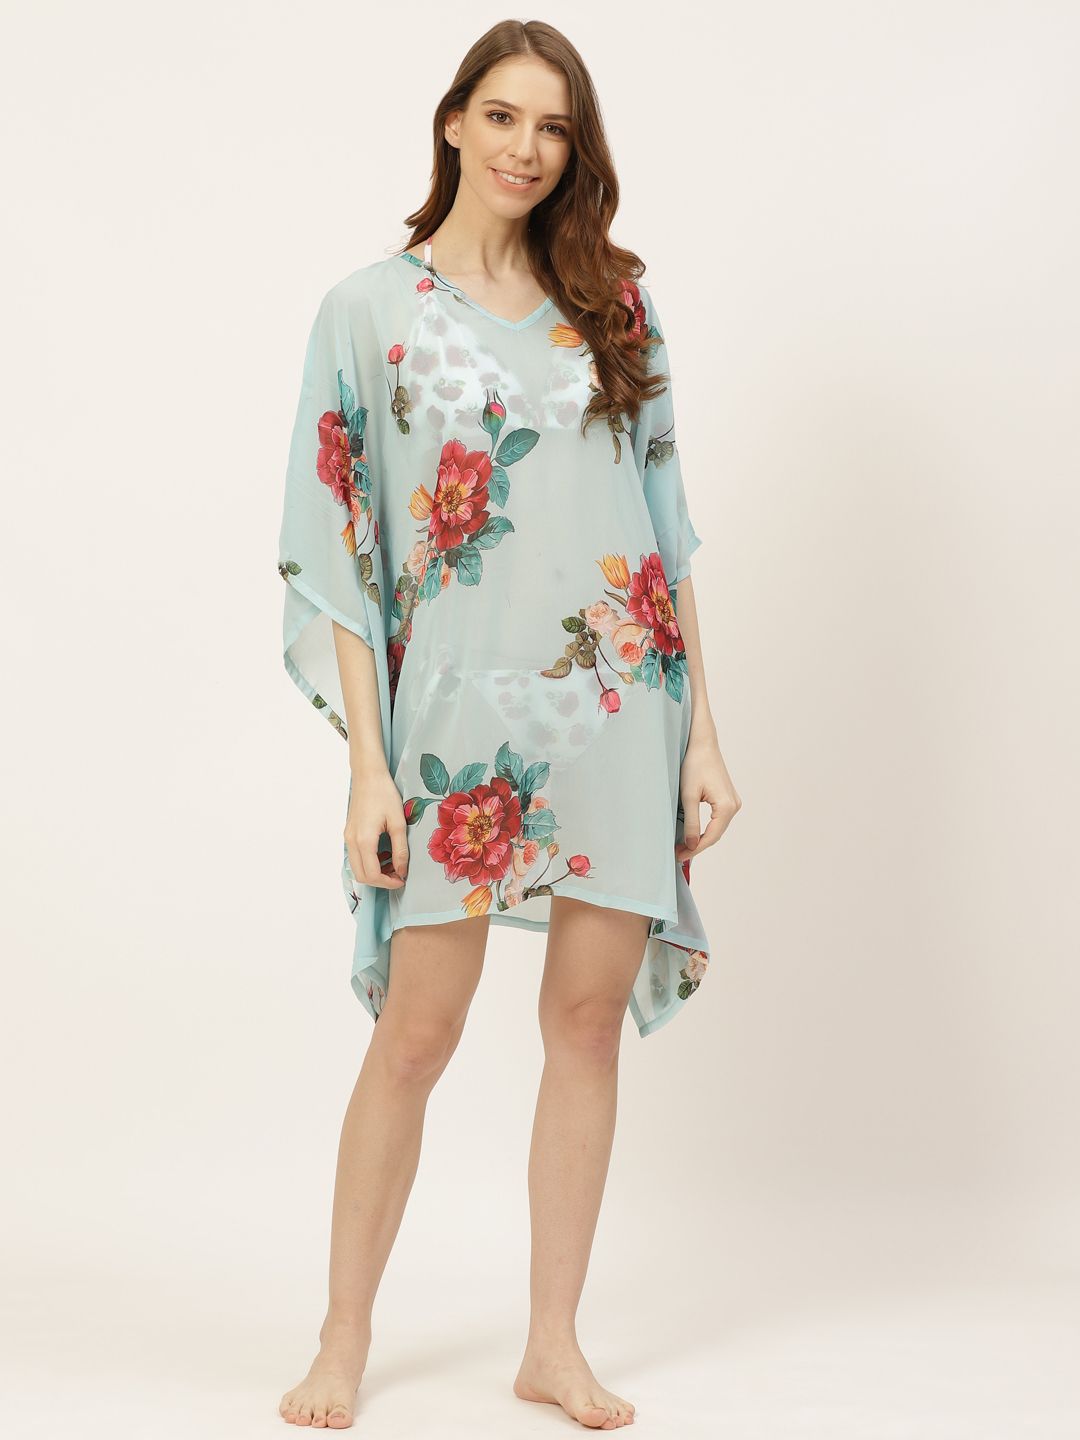 Clt.s Women Blue & Pink Floral Print Beach Kaftan Cover Up Dress Price in India